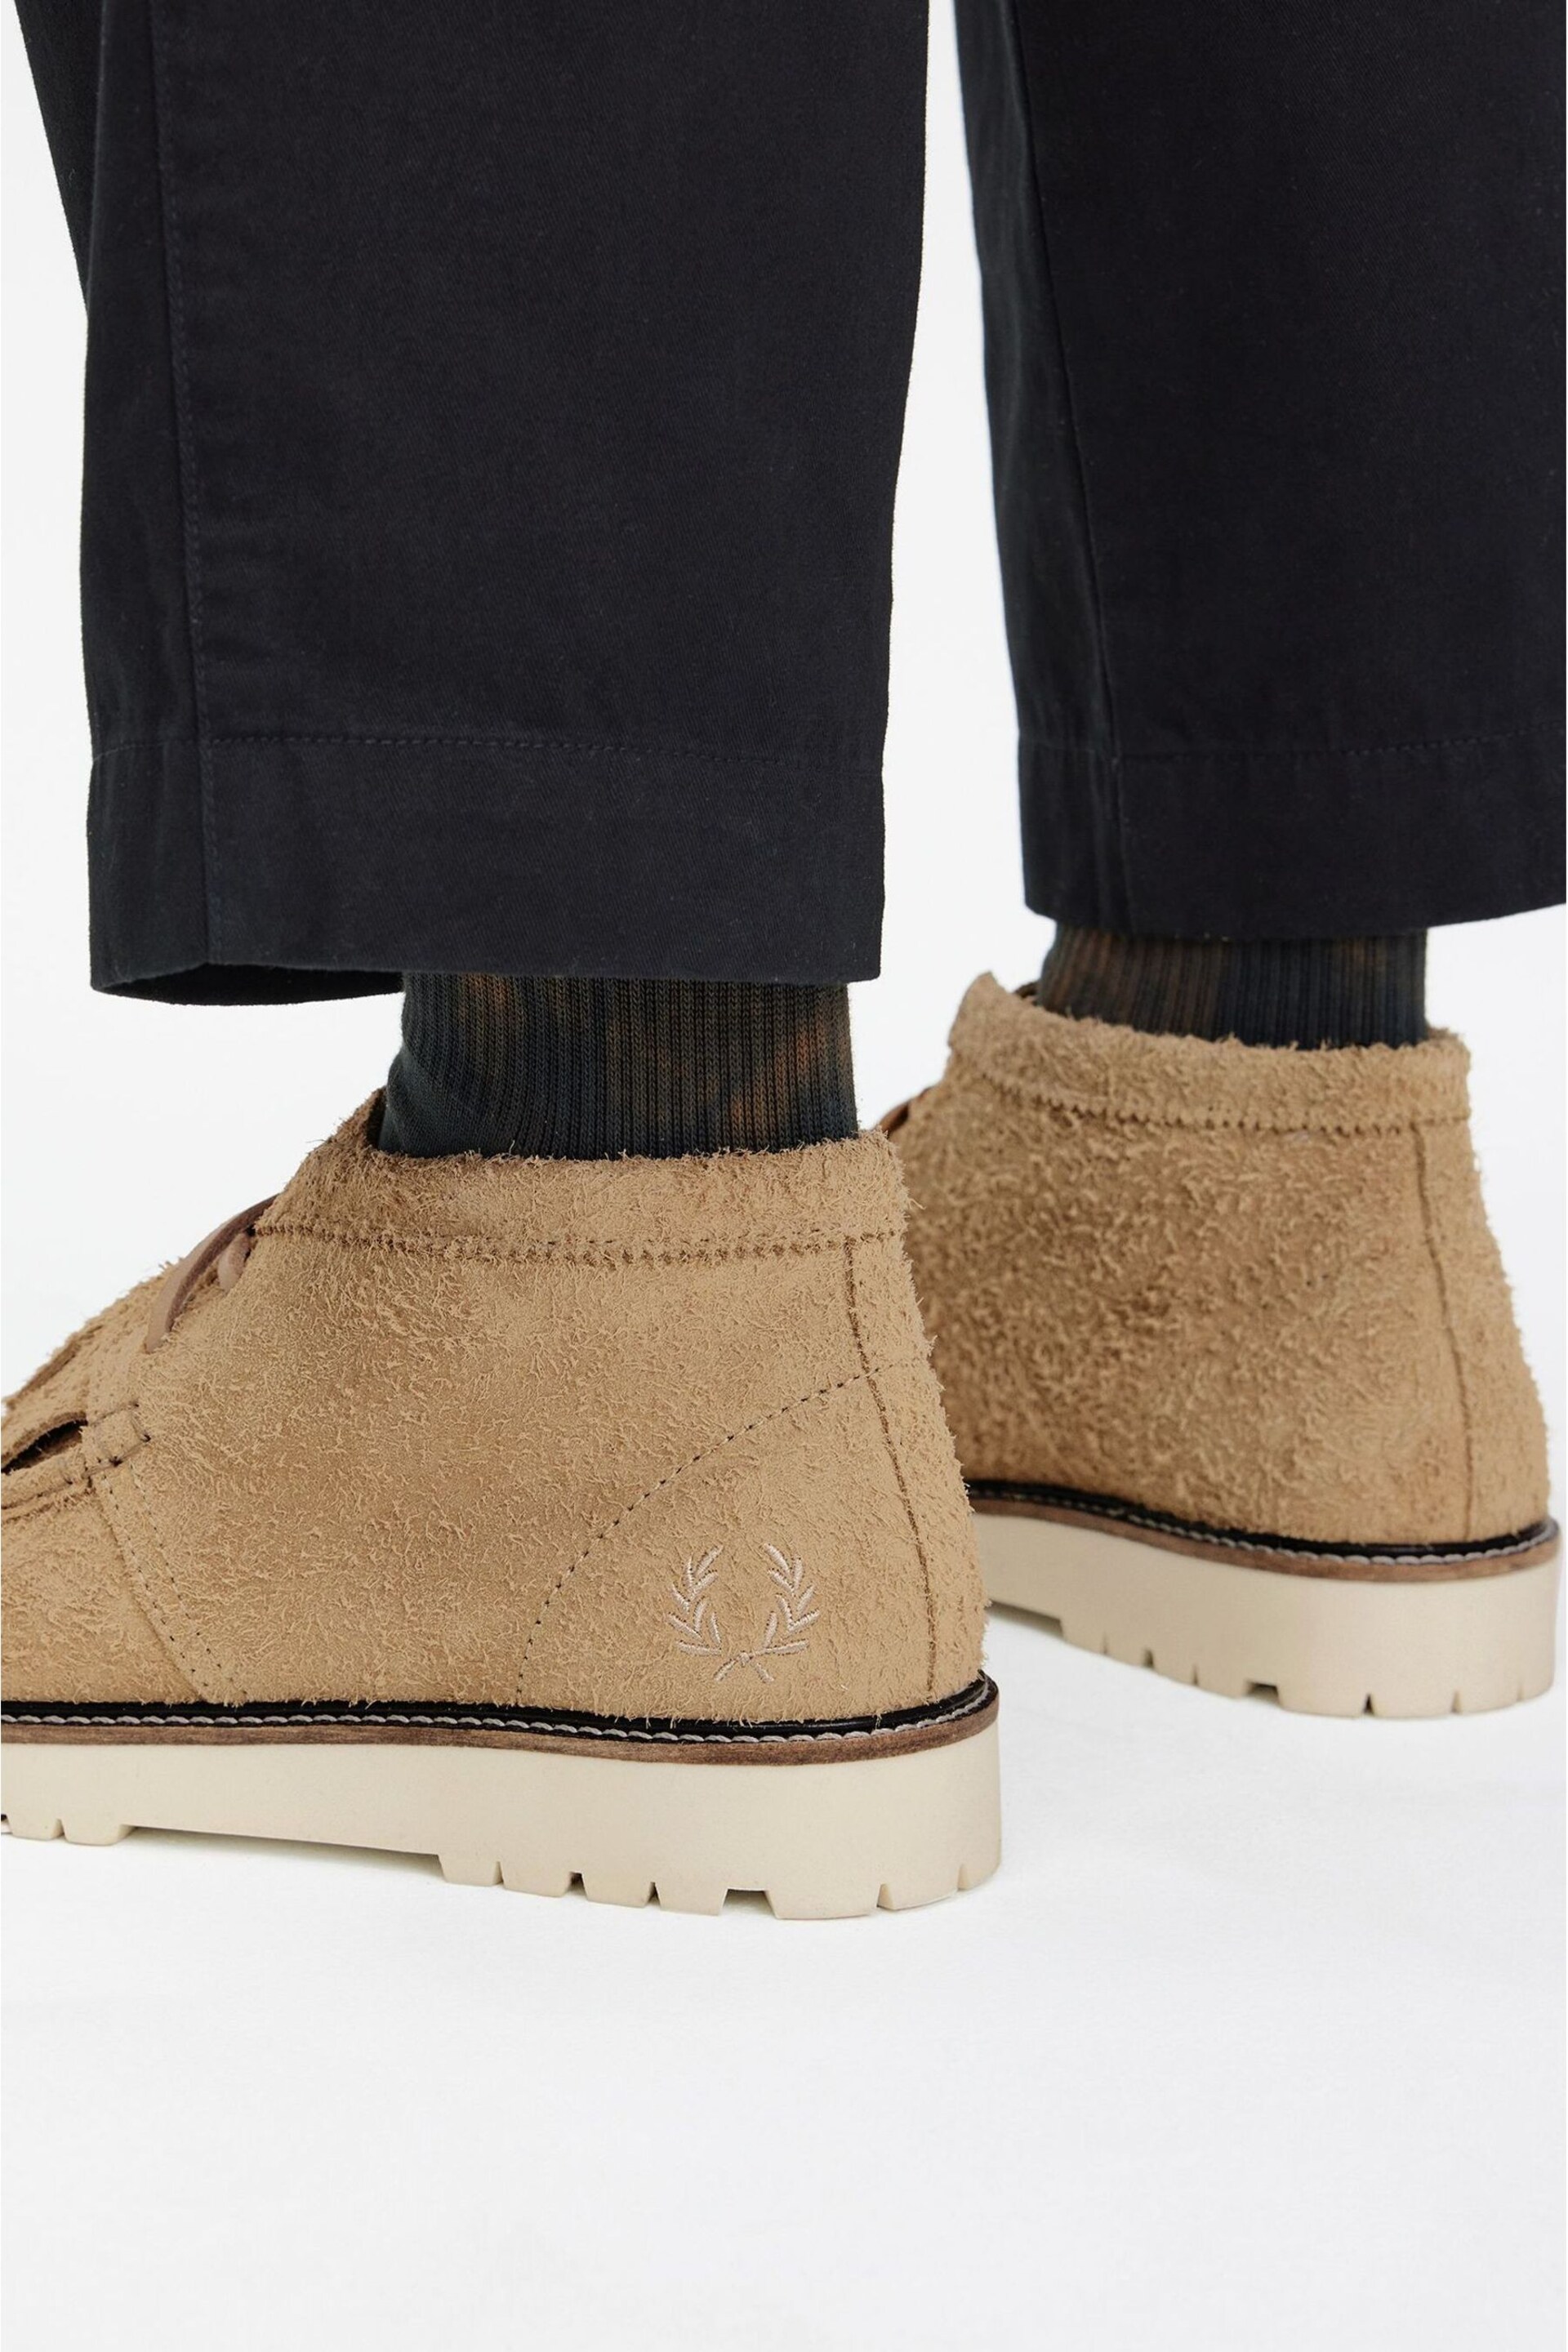 Fred Perry Stone Kenny Boots - Image 8 of 9